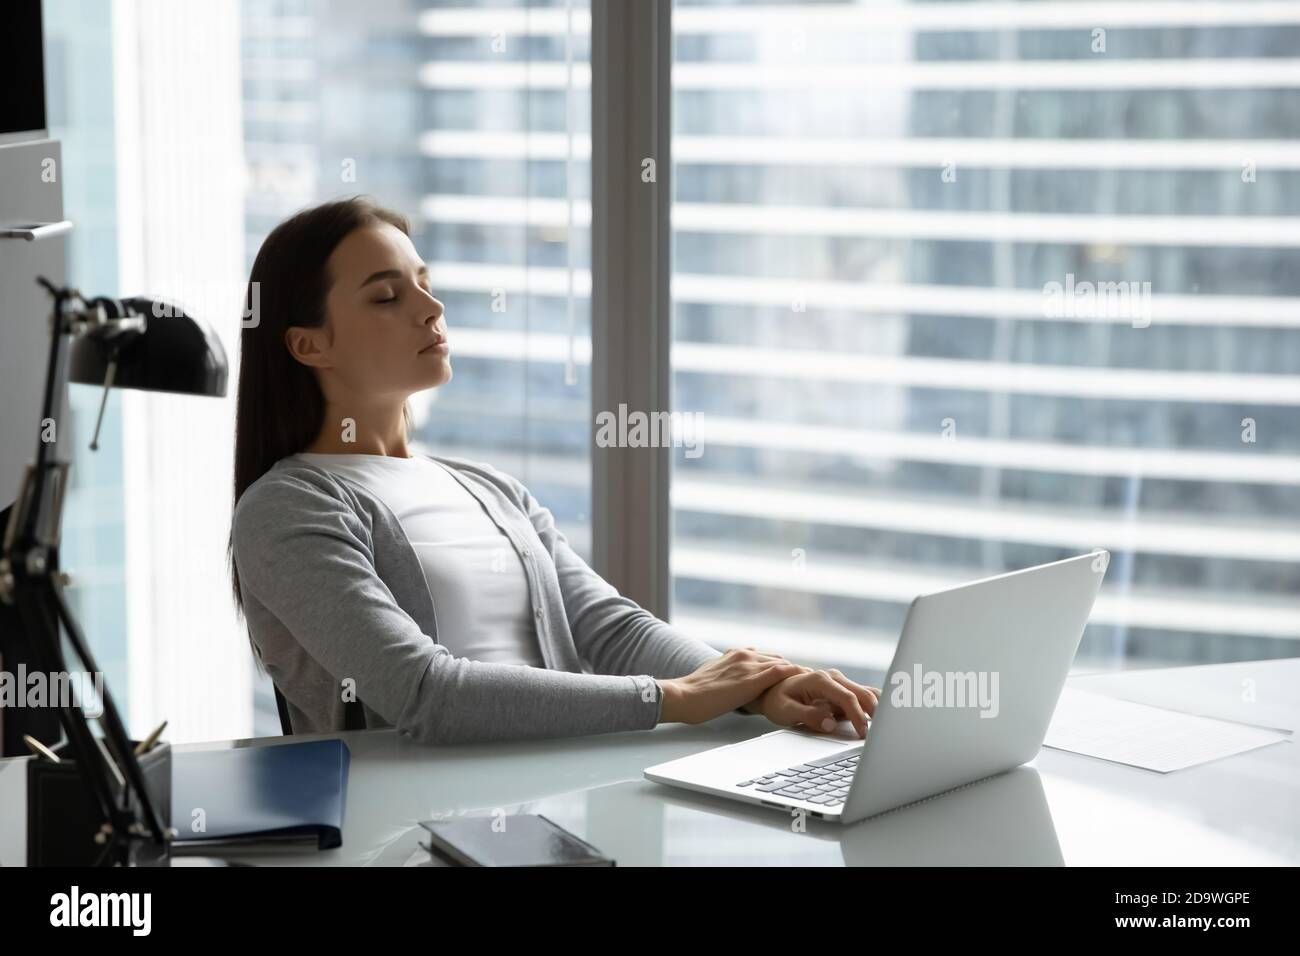 Peaceful woman employee with closed eyes leaning back on chair Stock Photo